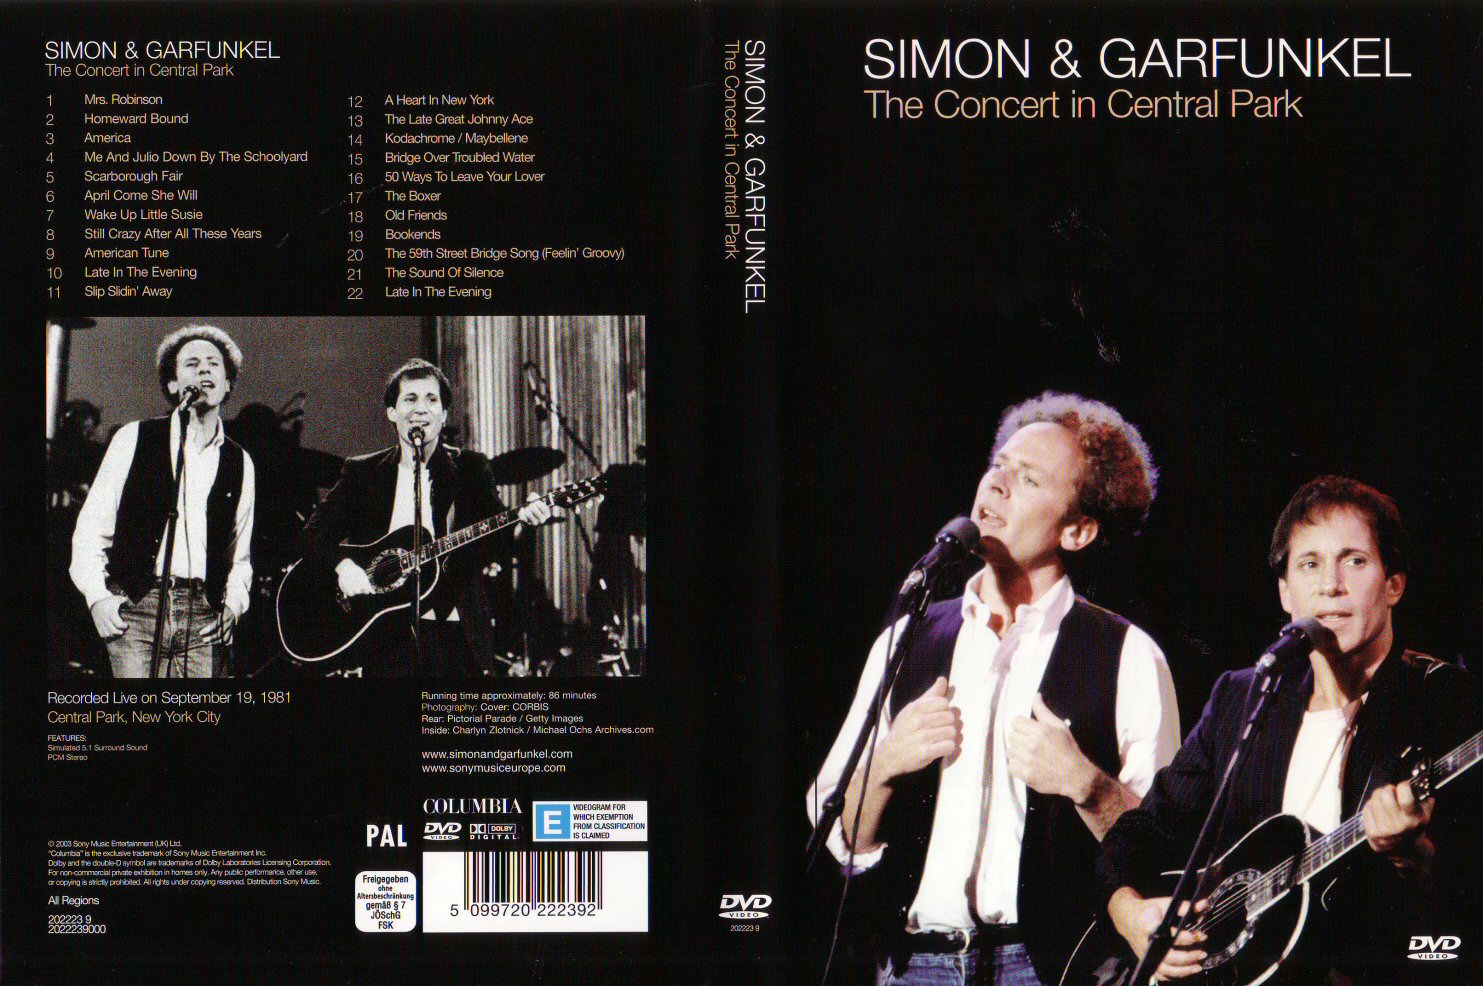 Jaquette DVD Simon and Garfunkel - The concert in central park